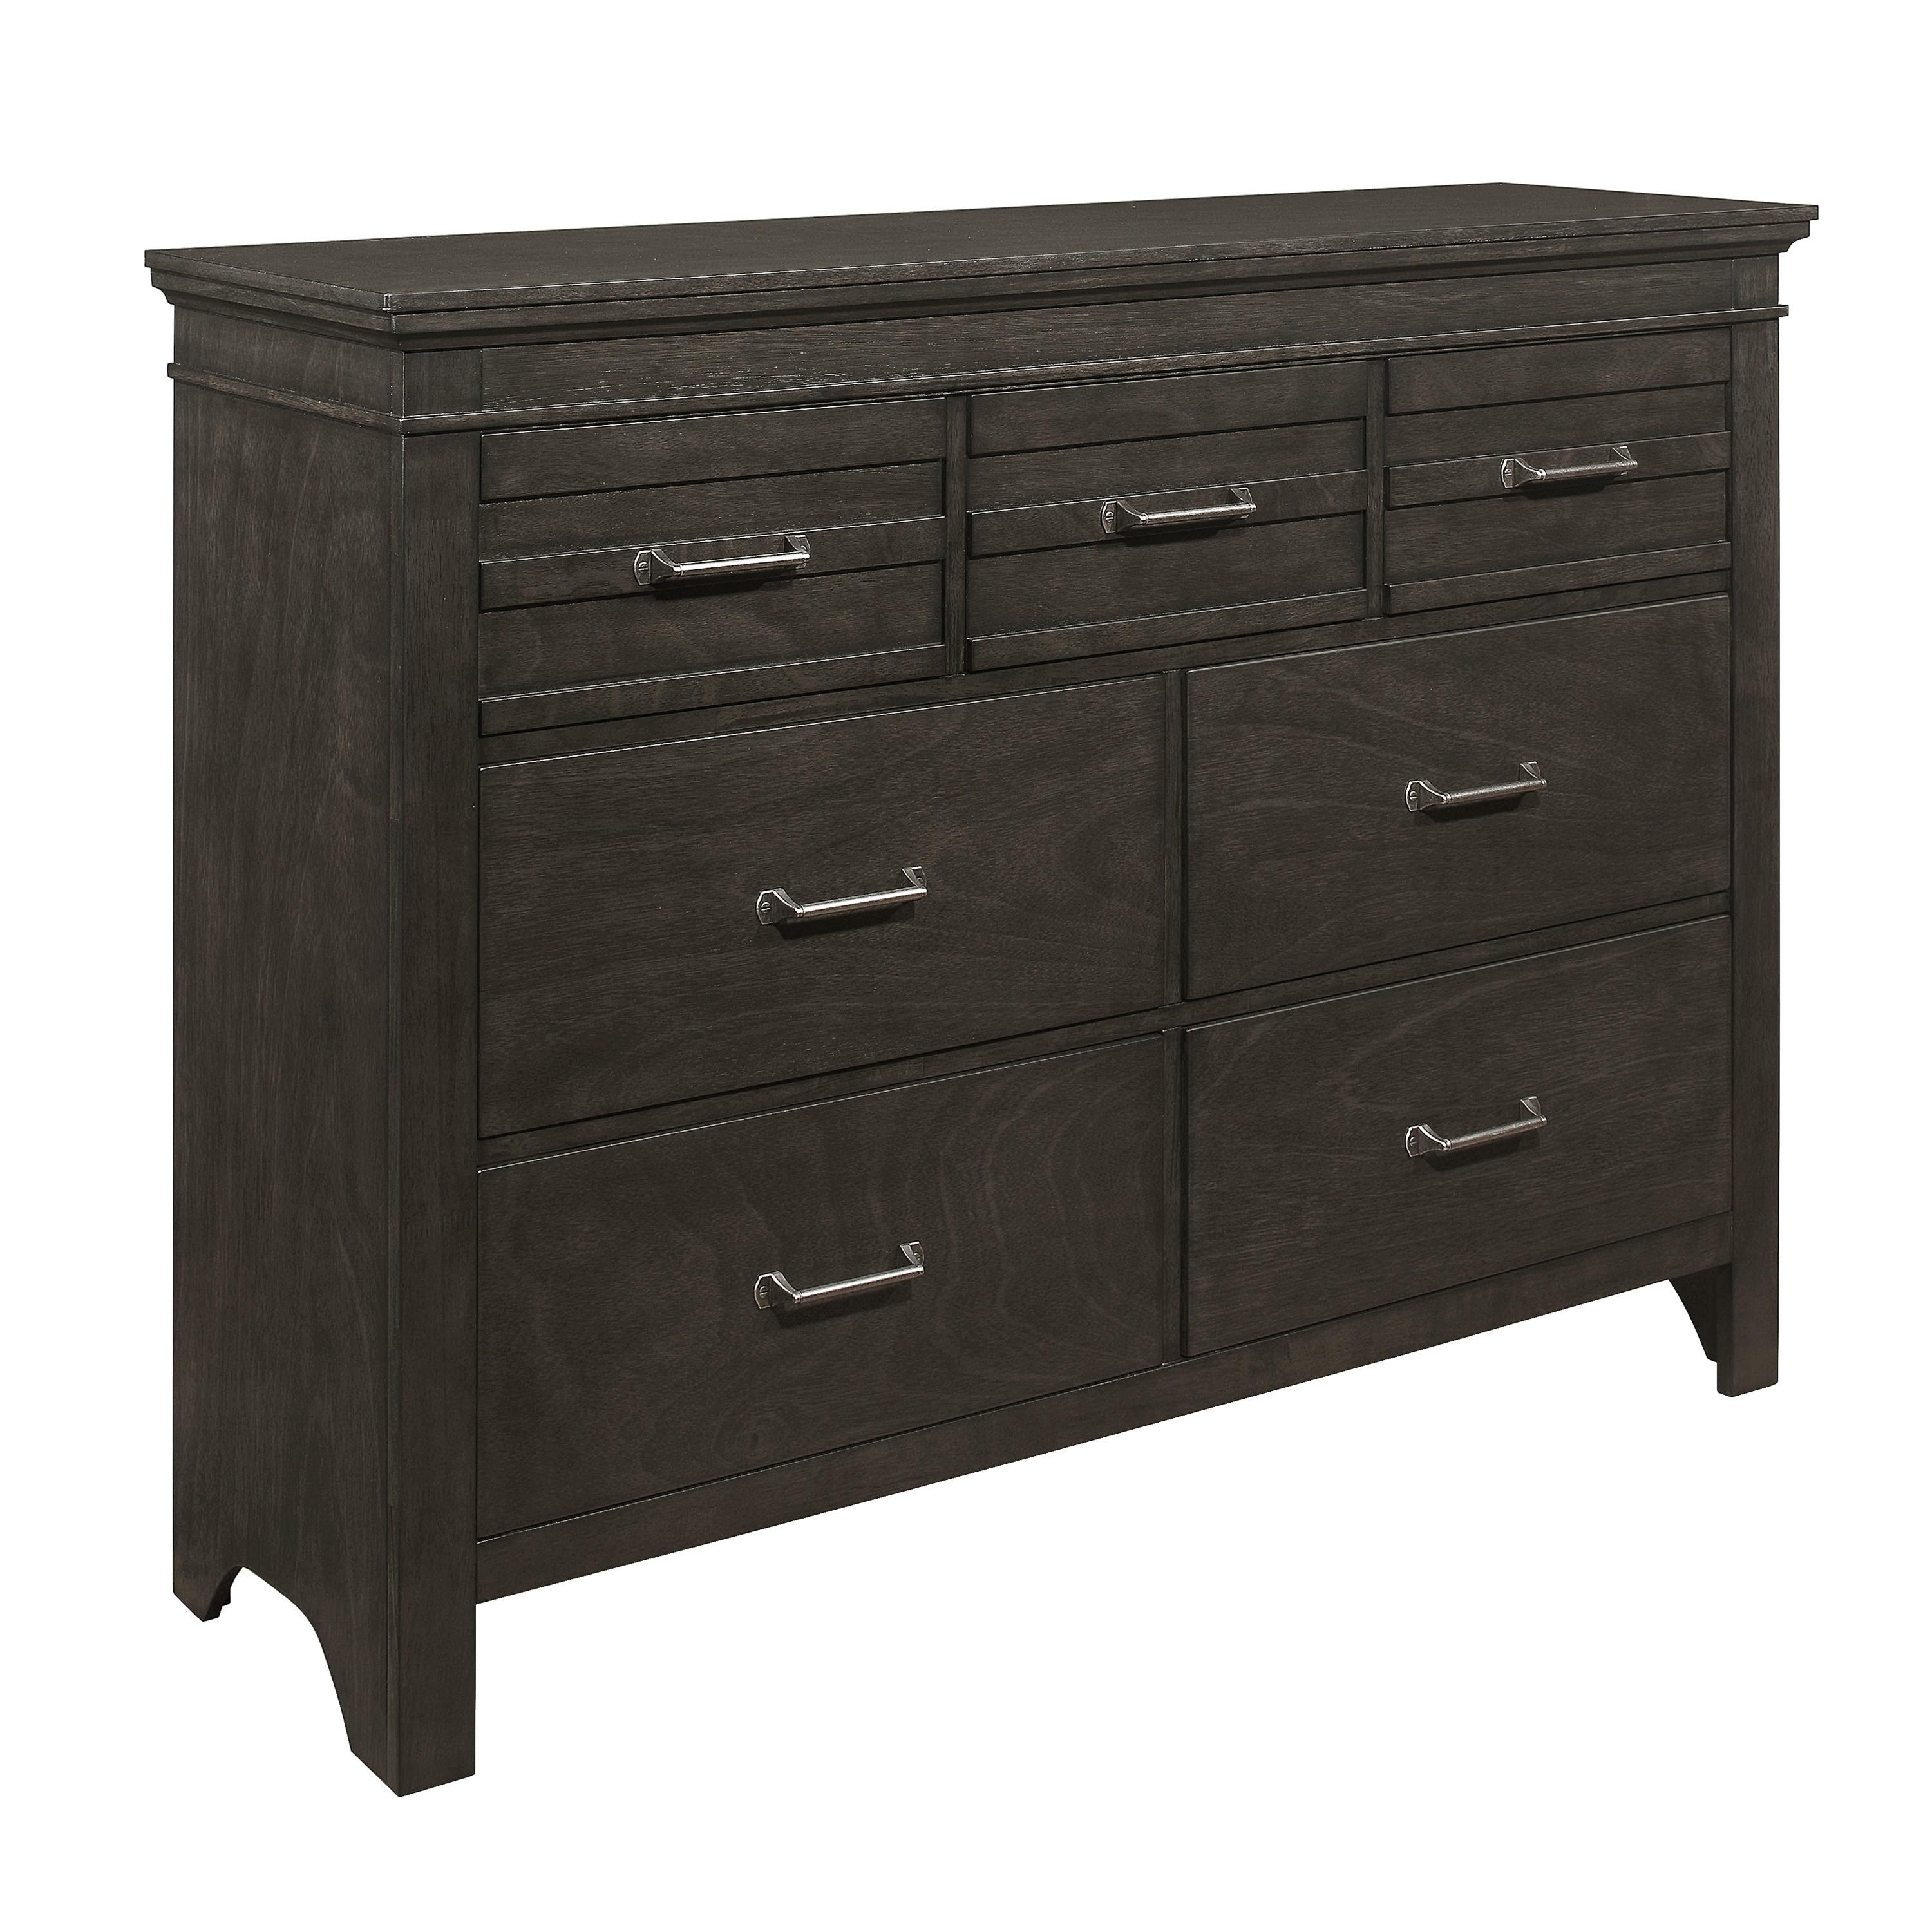 Transitional Dresser 1675-5 Blaire Farm 1675-5 in Charcoal 